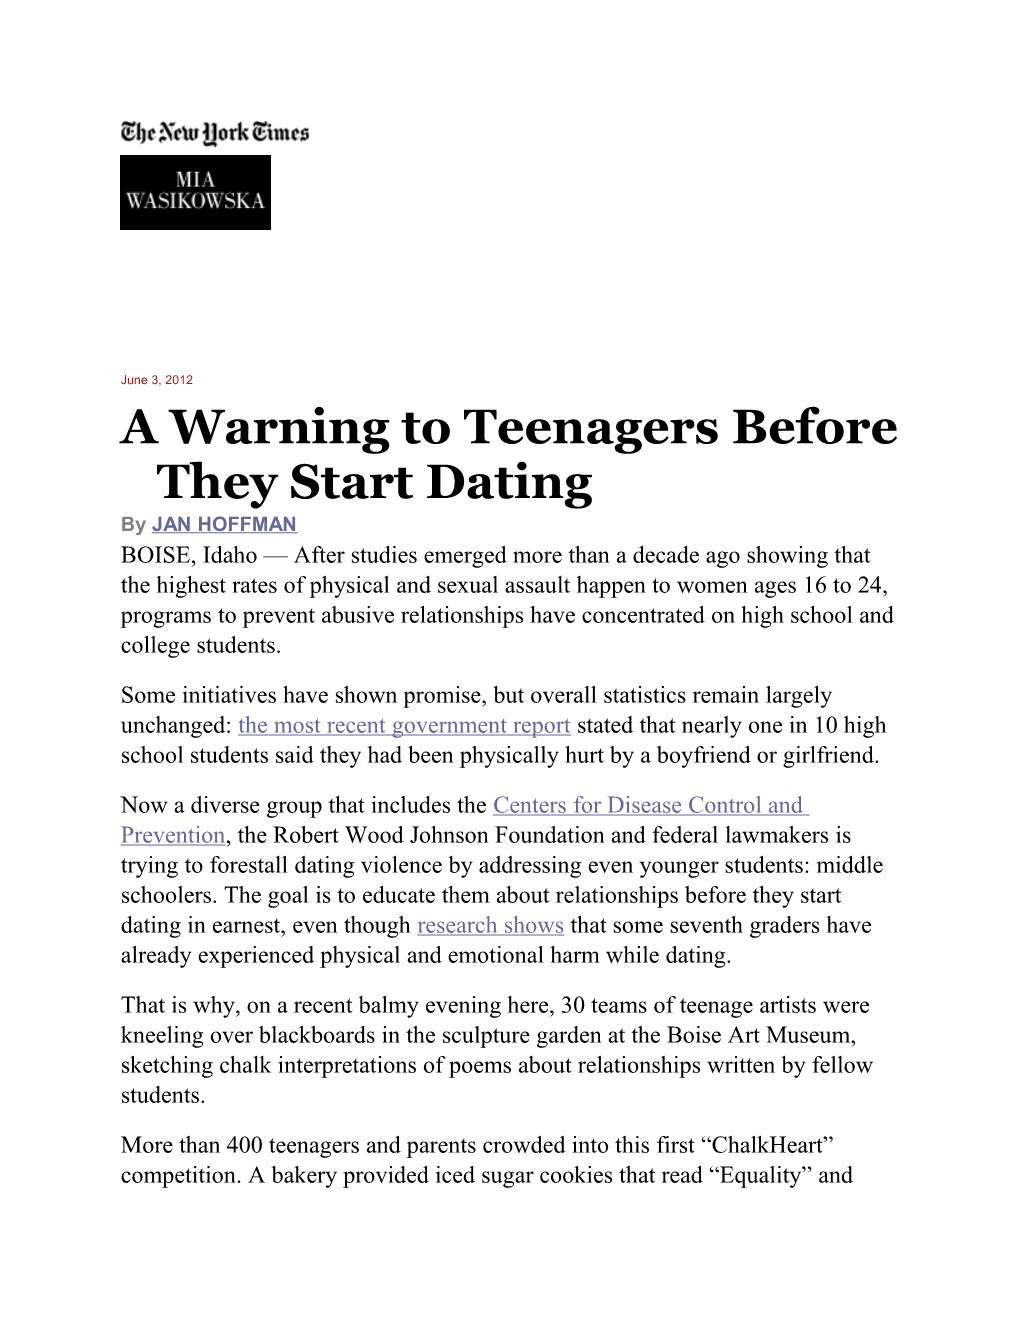 A Warning to Teenagers Before They Start Dating